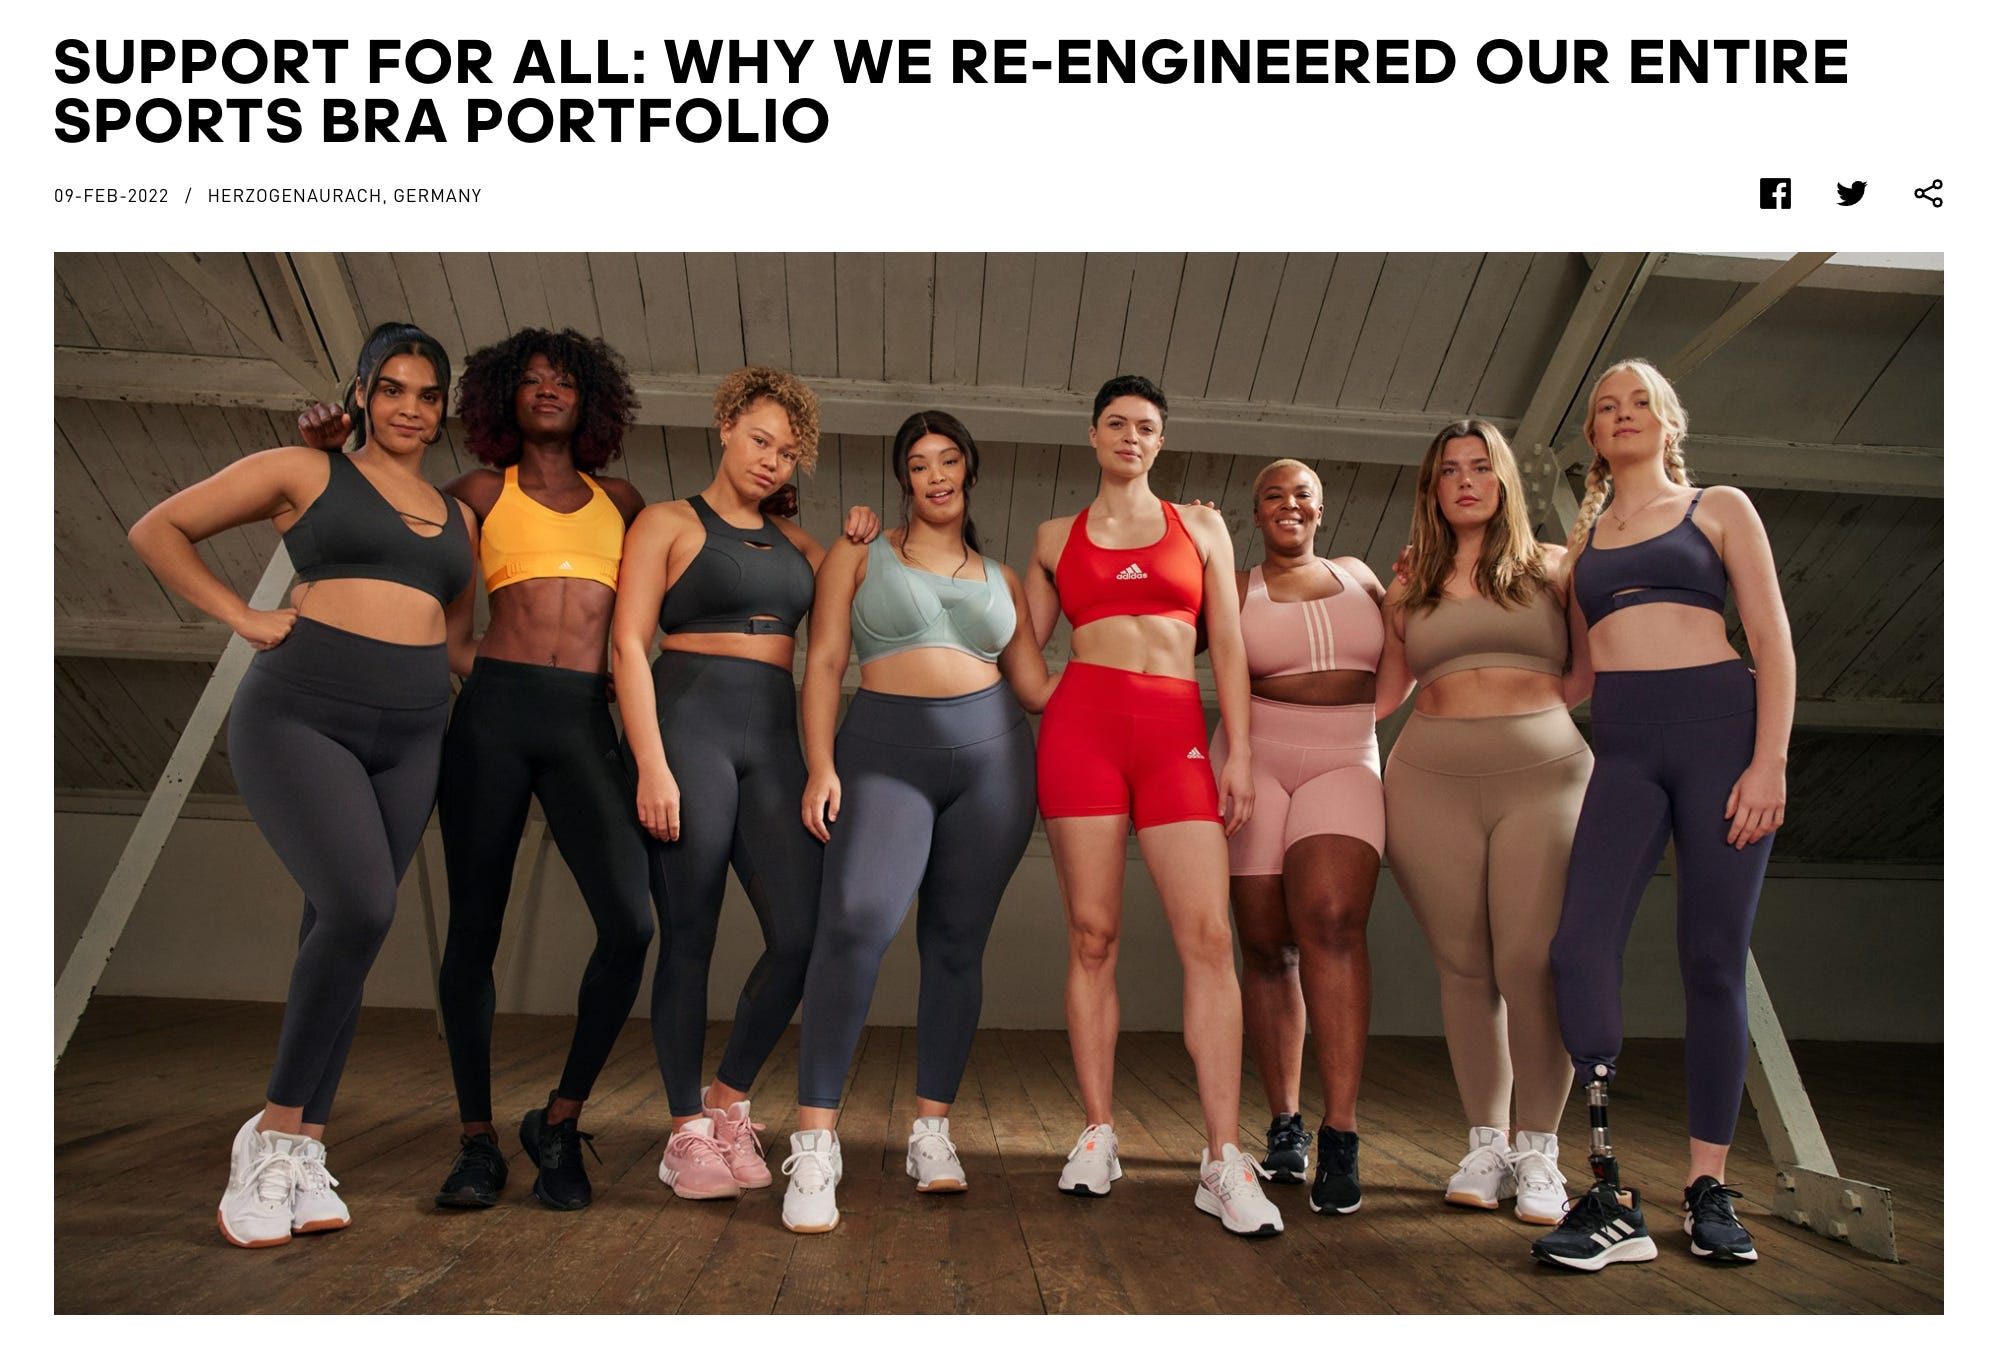 BBC - Photos of bare breasts in Adidas sports bra adverts